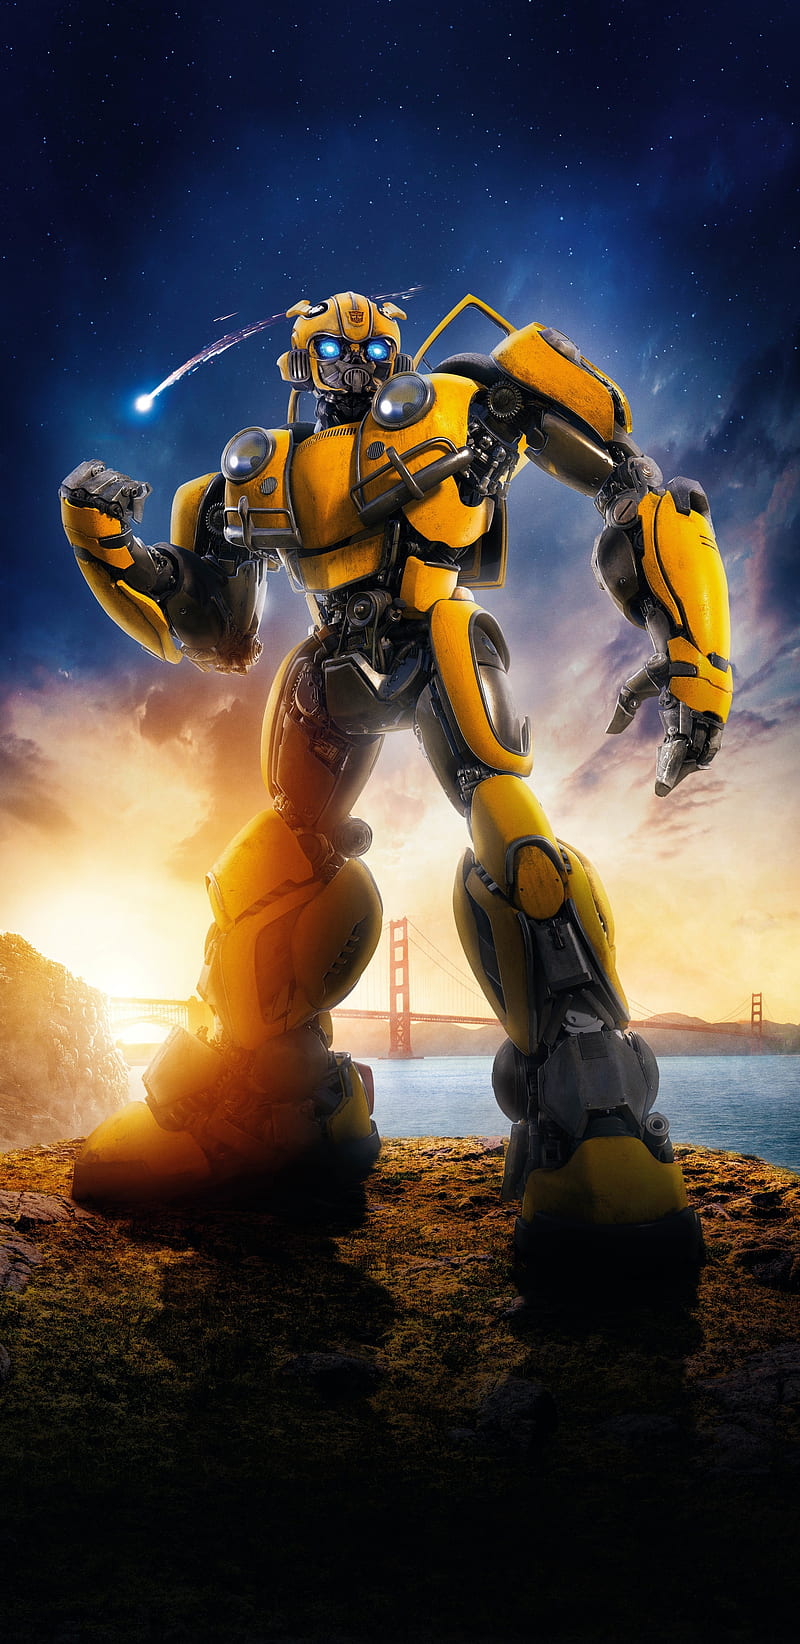 transformers 4 bumblebee wallpaper on LARGE PRINT 36X24 INCHES Photographic  Paper  Art  Paintings posters in India  Buy art film design movie  music nature and educational paintingswallpapers at Flipkartcom